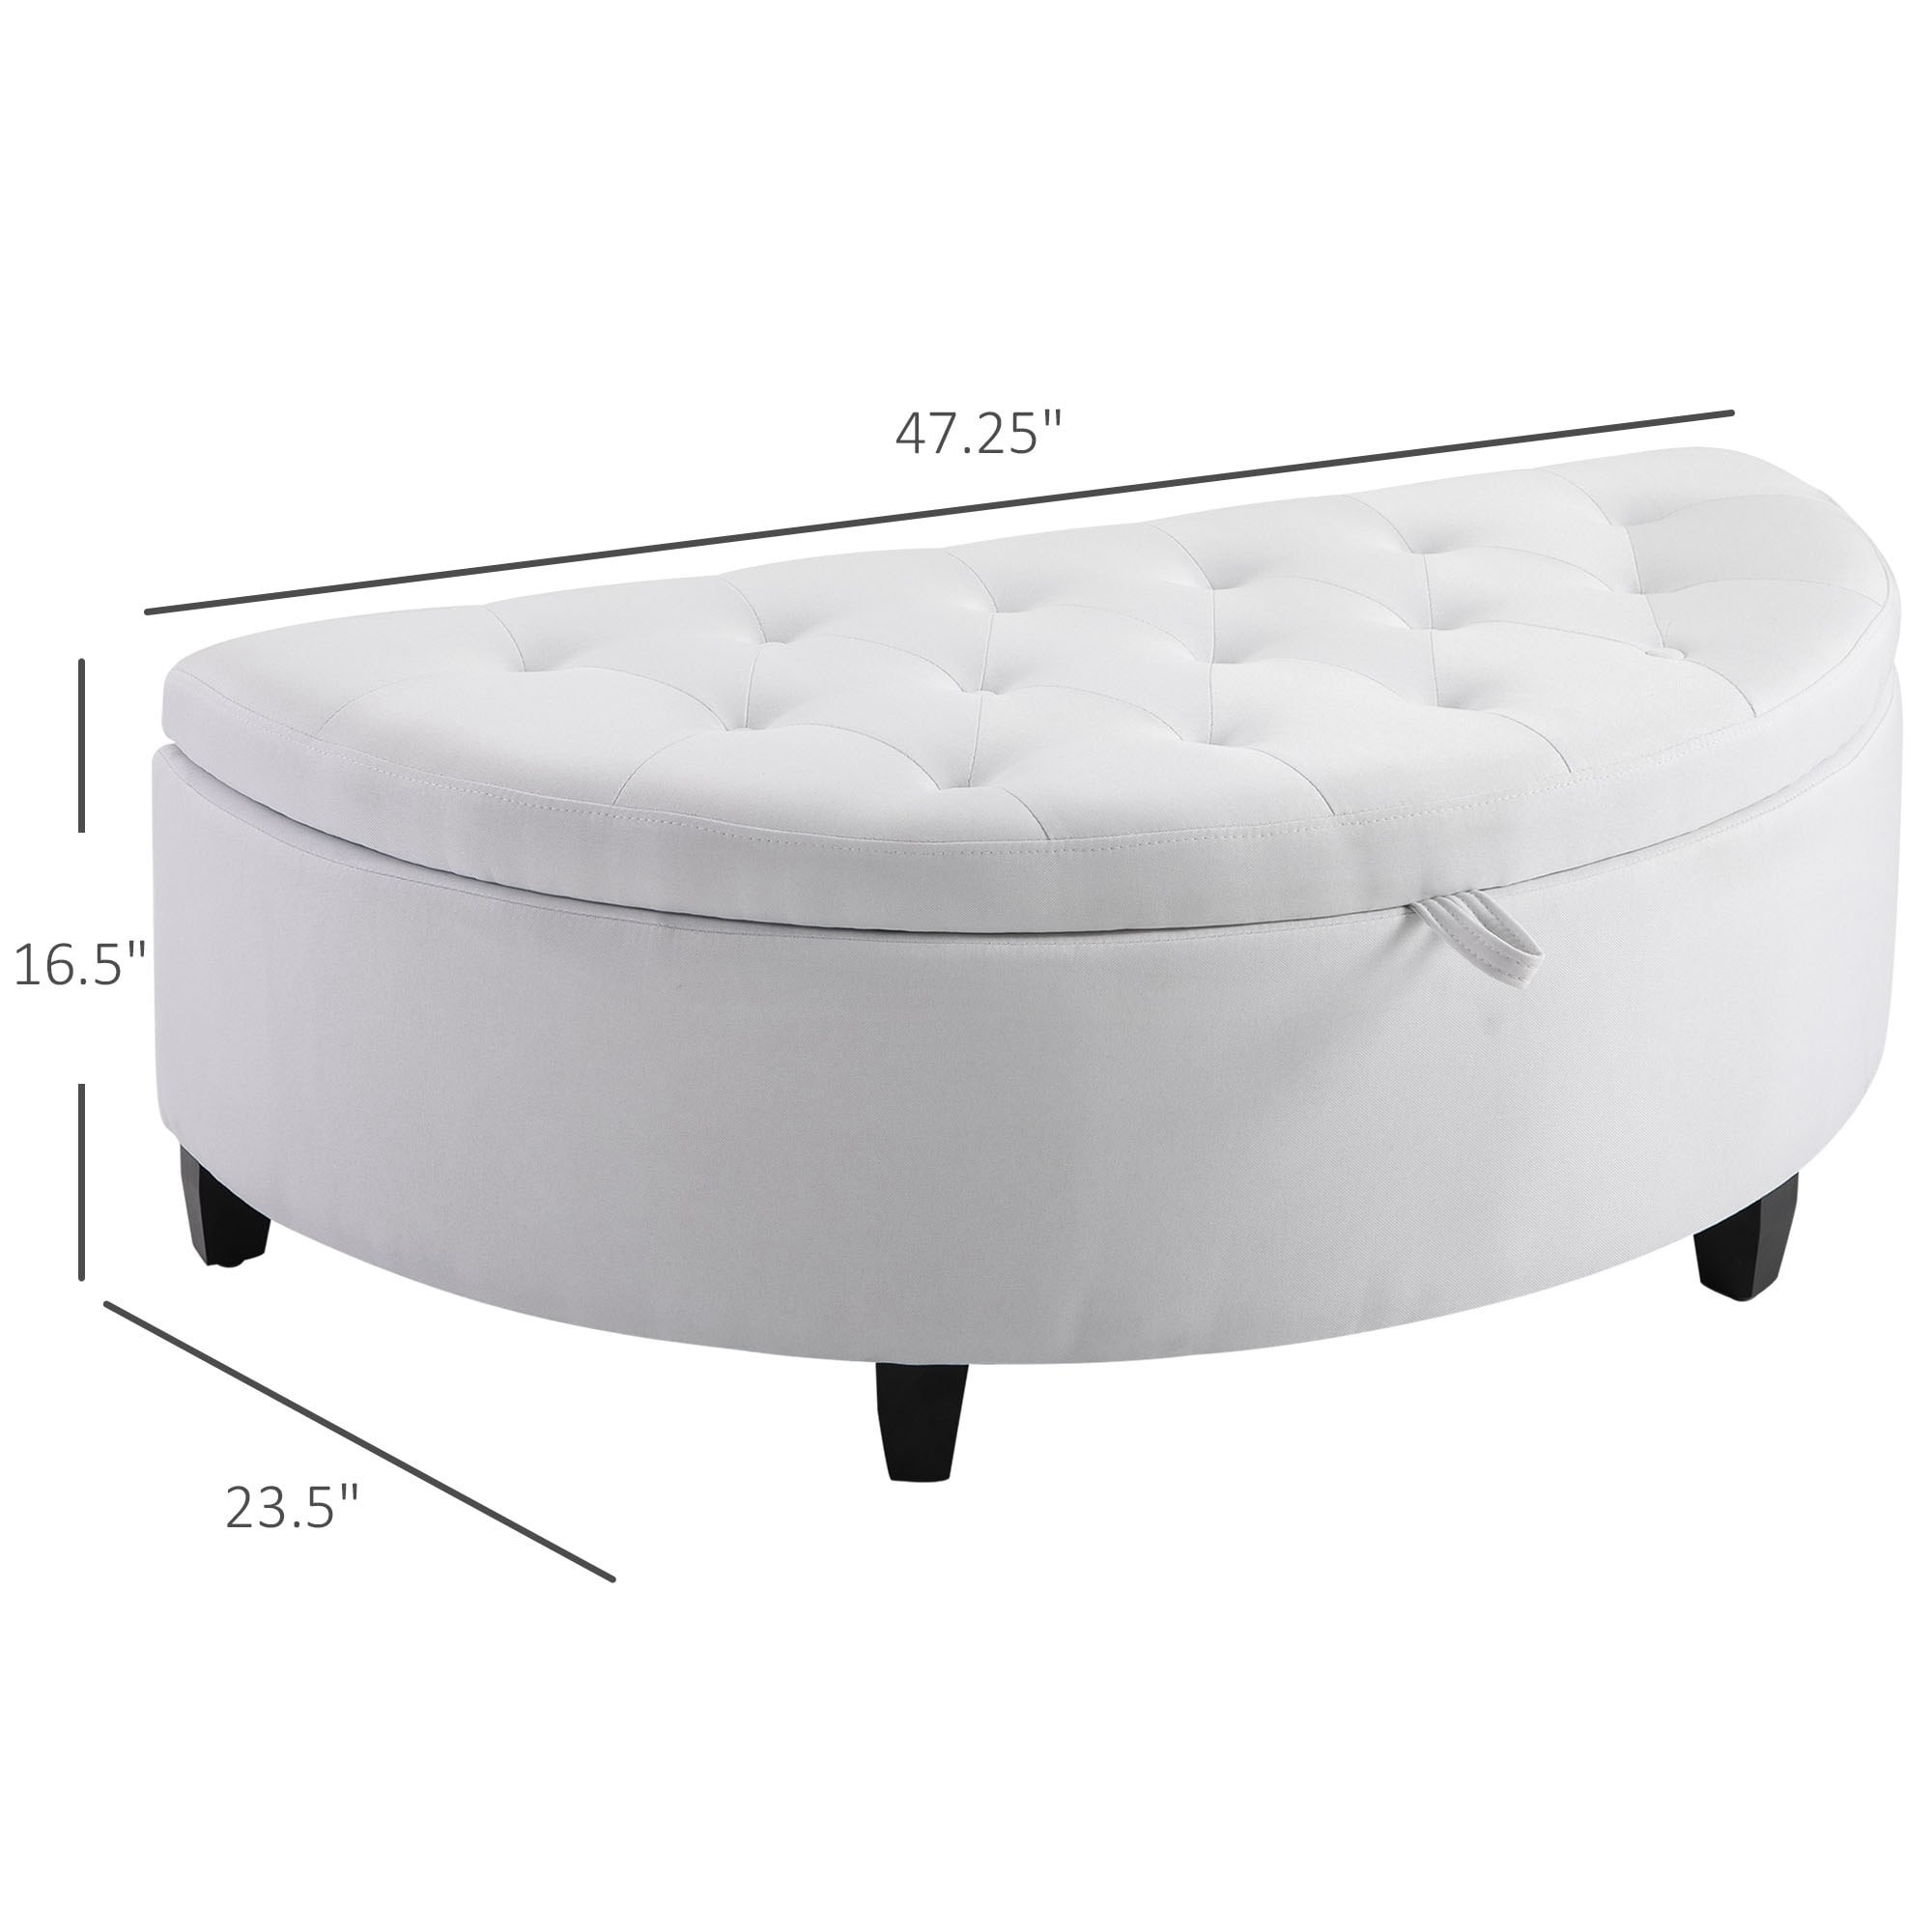 https://ak1.ostkcdn.com/images/products/is/images/direct/7bed64ebaabe49c94b10dfcb3c89be08994586fc/HOMCOM-Half-Circle-Modern-Luxurious-Storage-Polyester-Fabric-Ottoman-Bed-Bench-with-Legs-Lift-Lid-Thick-Sponge-Pad-Ideal-Bench.jpg